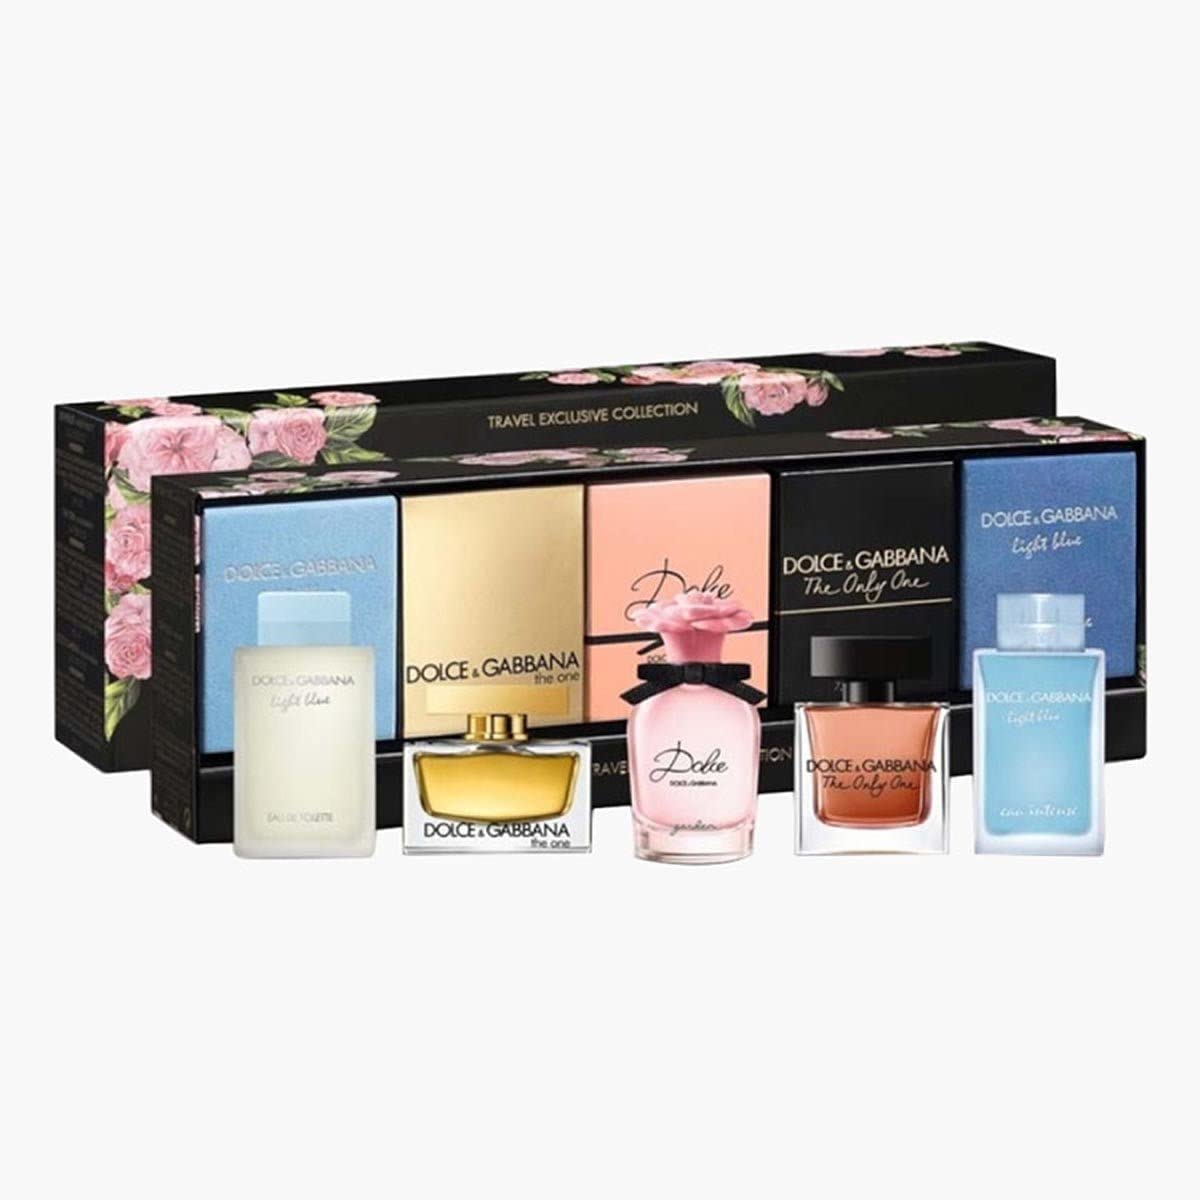 Dolce and Gabbana Travel Exclusive Collection Women 5 Pc Gift Set Light  Blue, Only One, Garden,